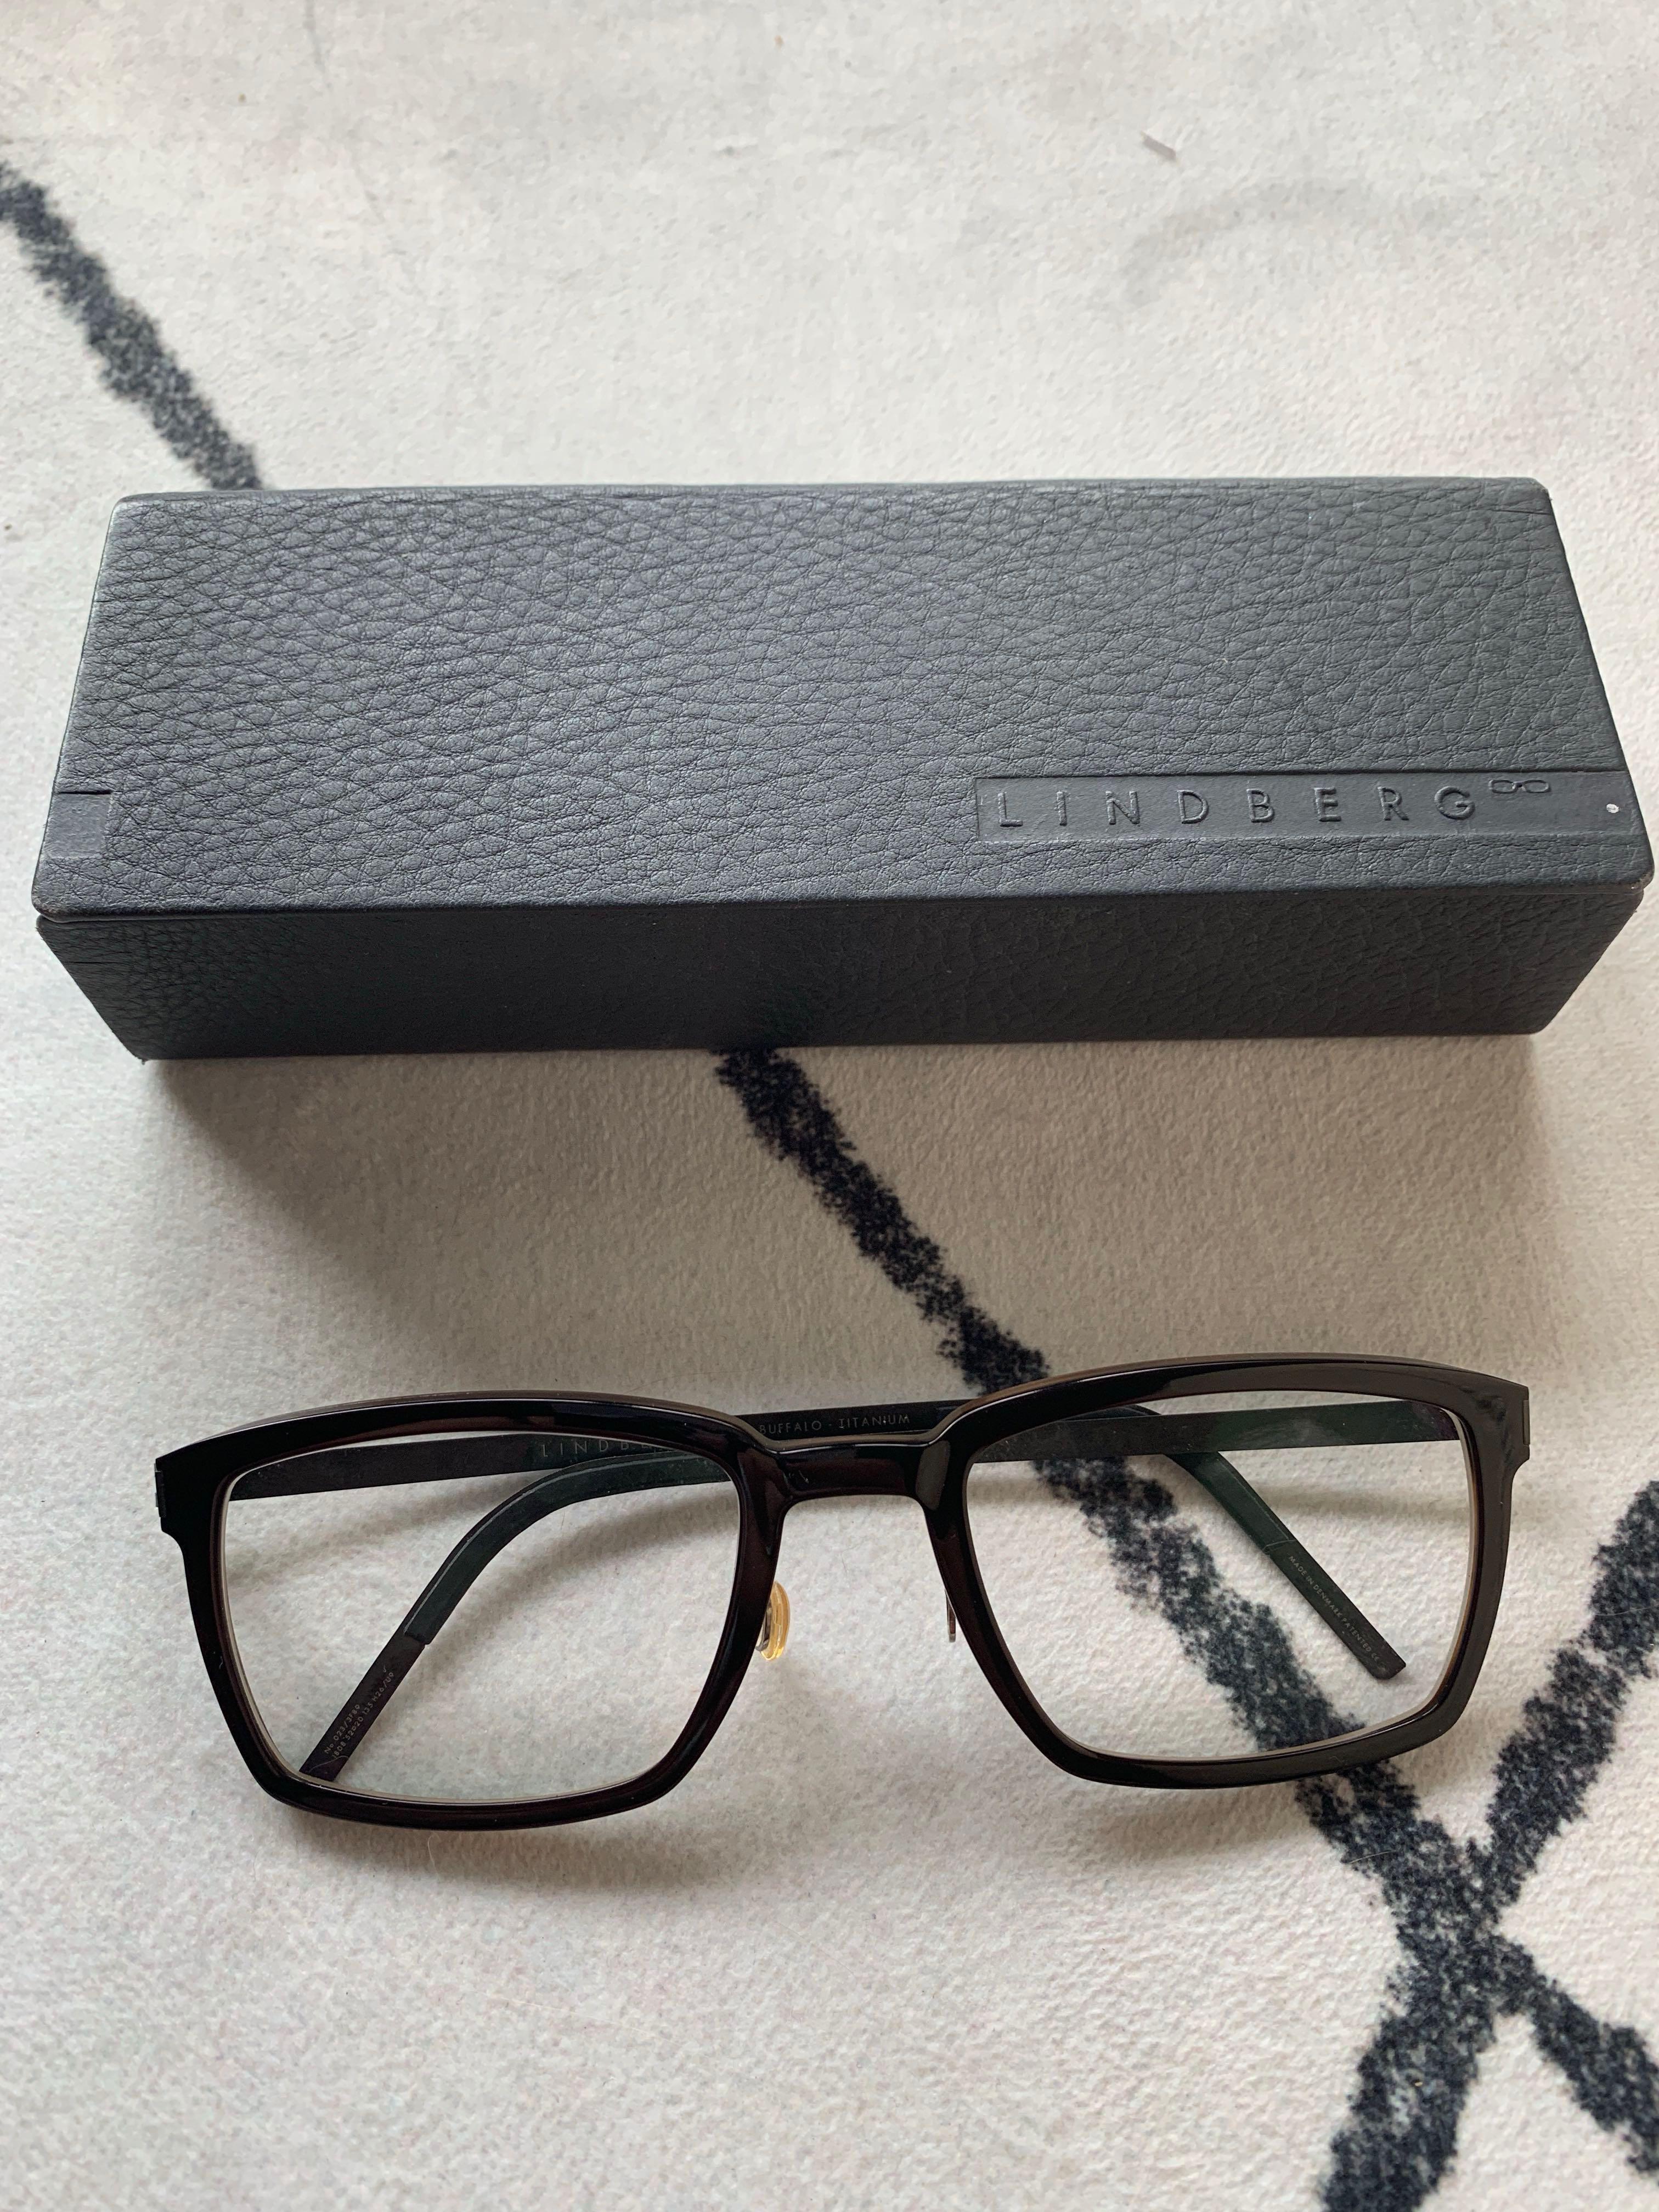 100% Authentic Lindberg buffalo titanium frame eyewear men's unisex BN with box glasses spectacles, Men's Fashion, & Accessories, Sunglasses on Carousell